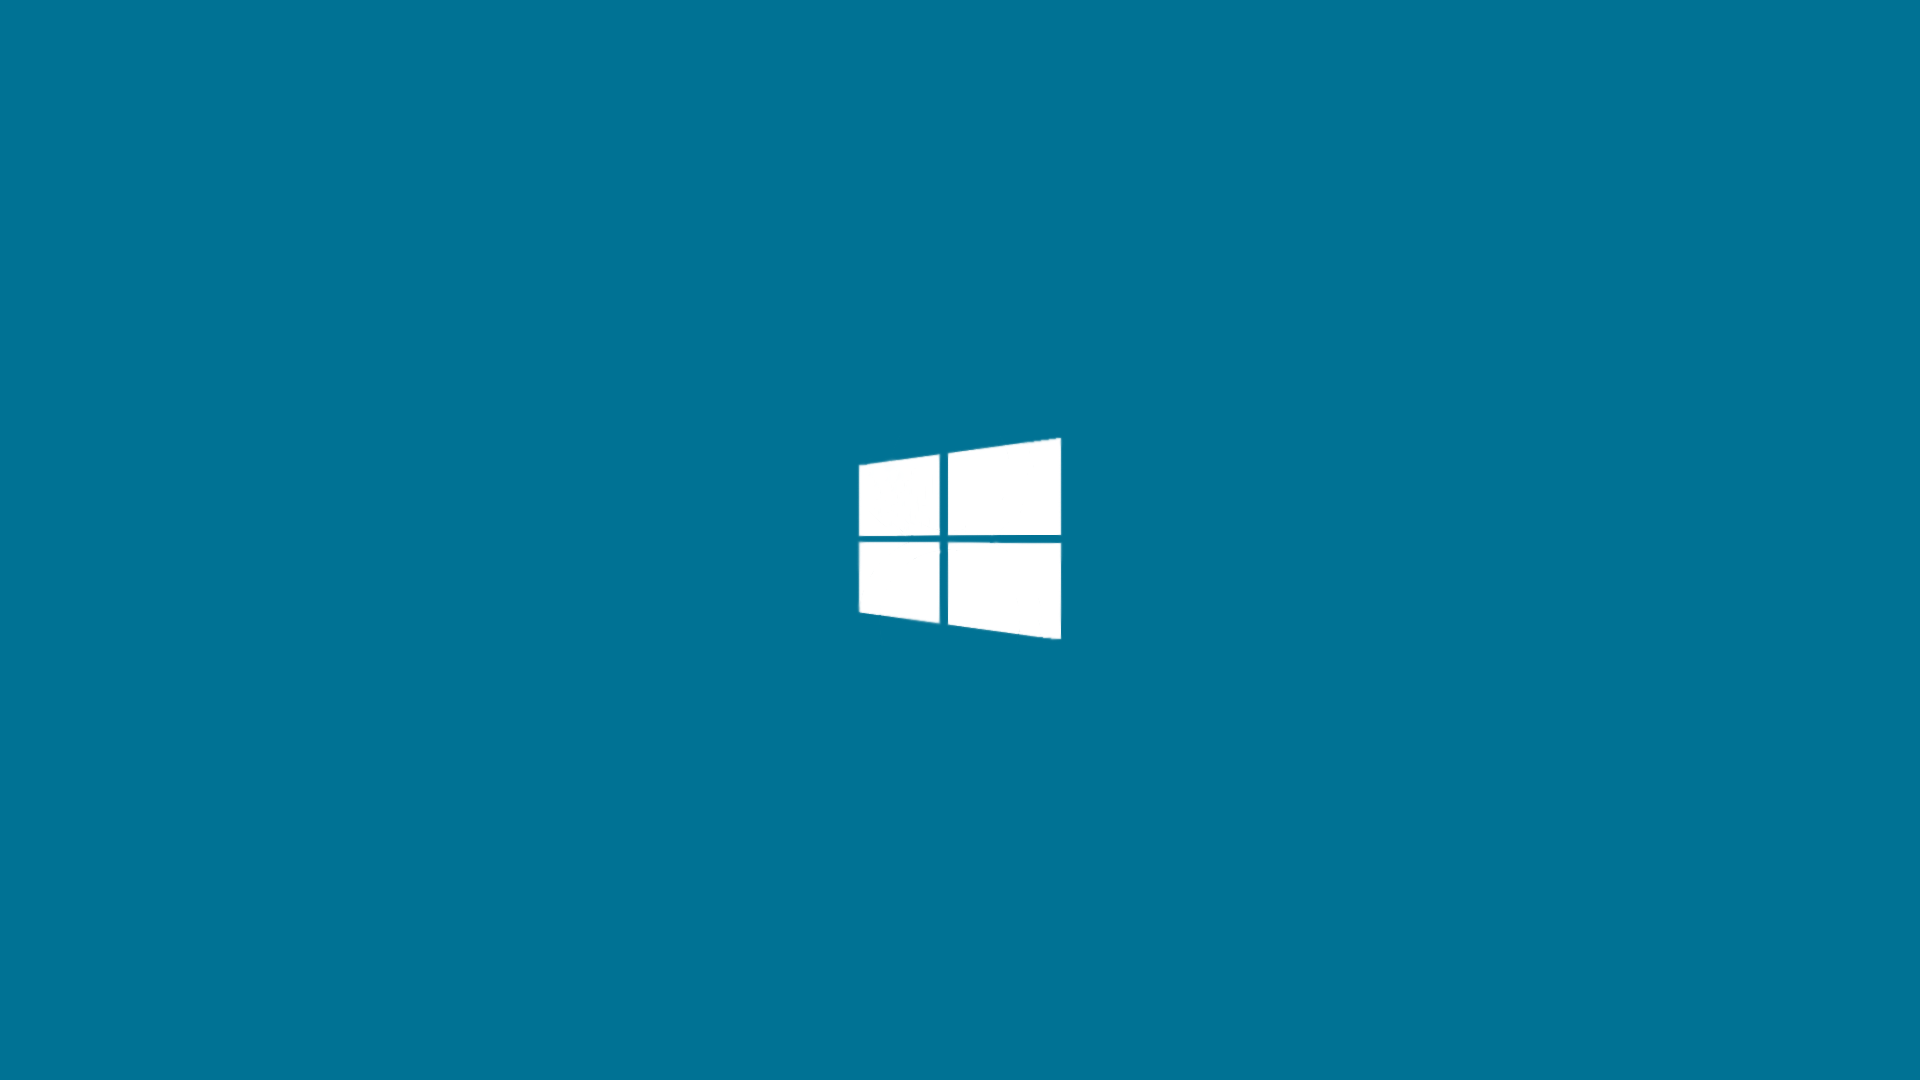 View topic   Windows 8 Photoshop Wallpapers Updated   BetaArchive 1920x1080